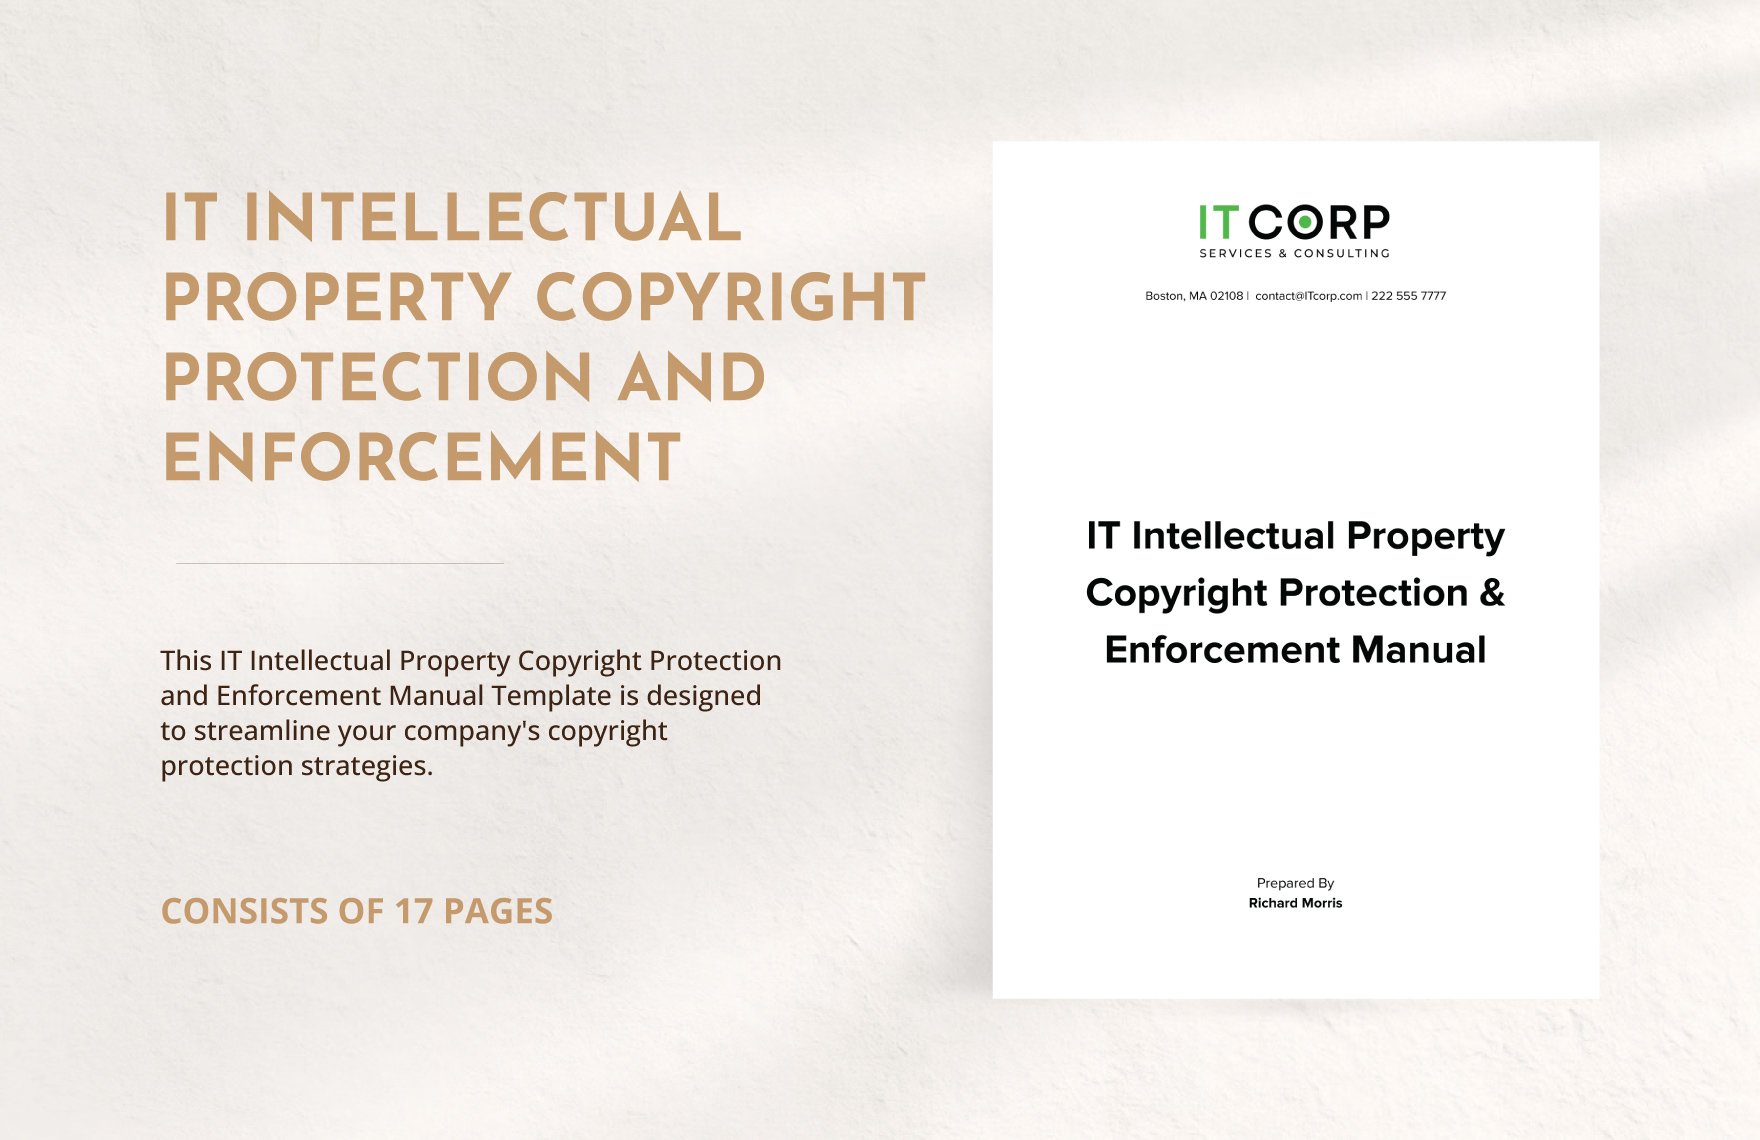 IT Intellectual Property Copyright Protection and Enforcement Manual Template in Word, Google Docs, PDF